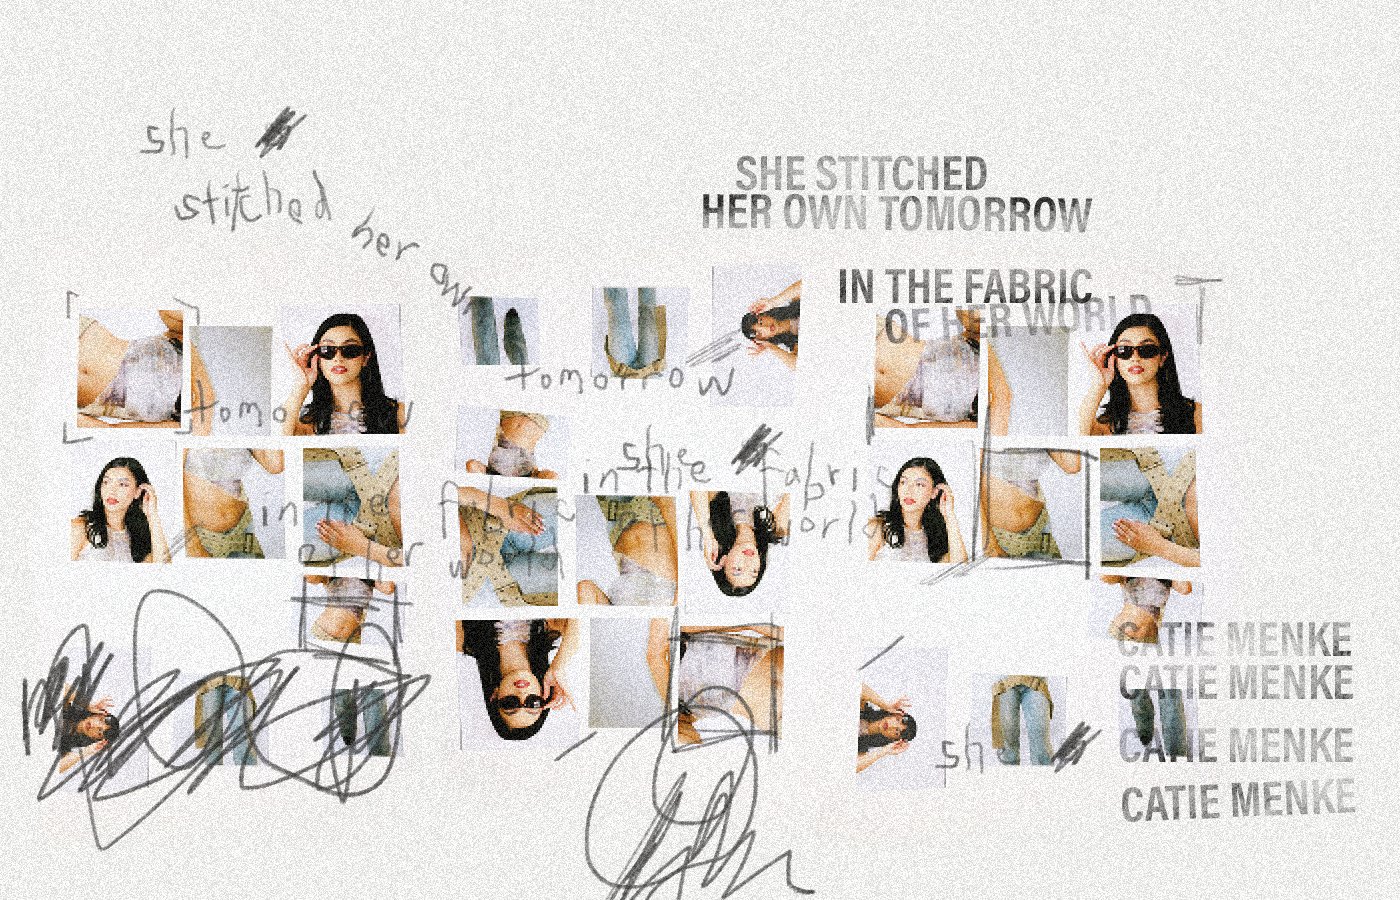  She stitched her own tomorrow in the fabric of her world. Fashion photography and poetic art design by Catie Menke.  